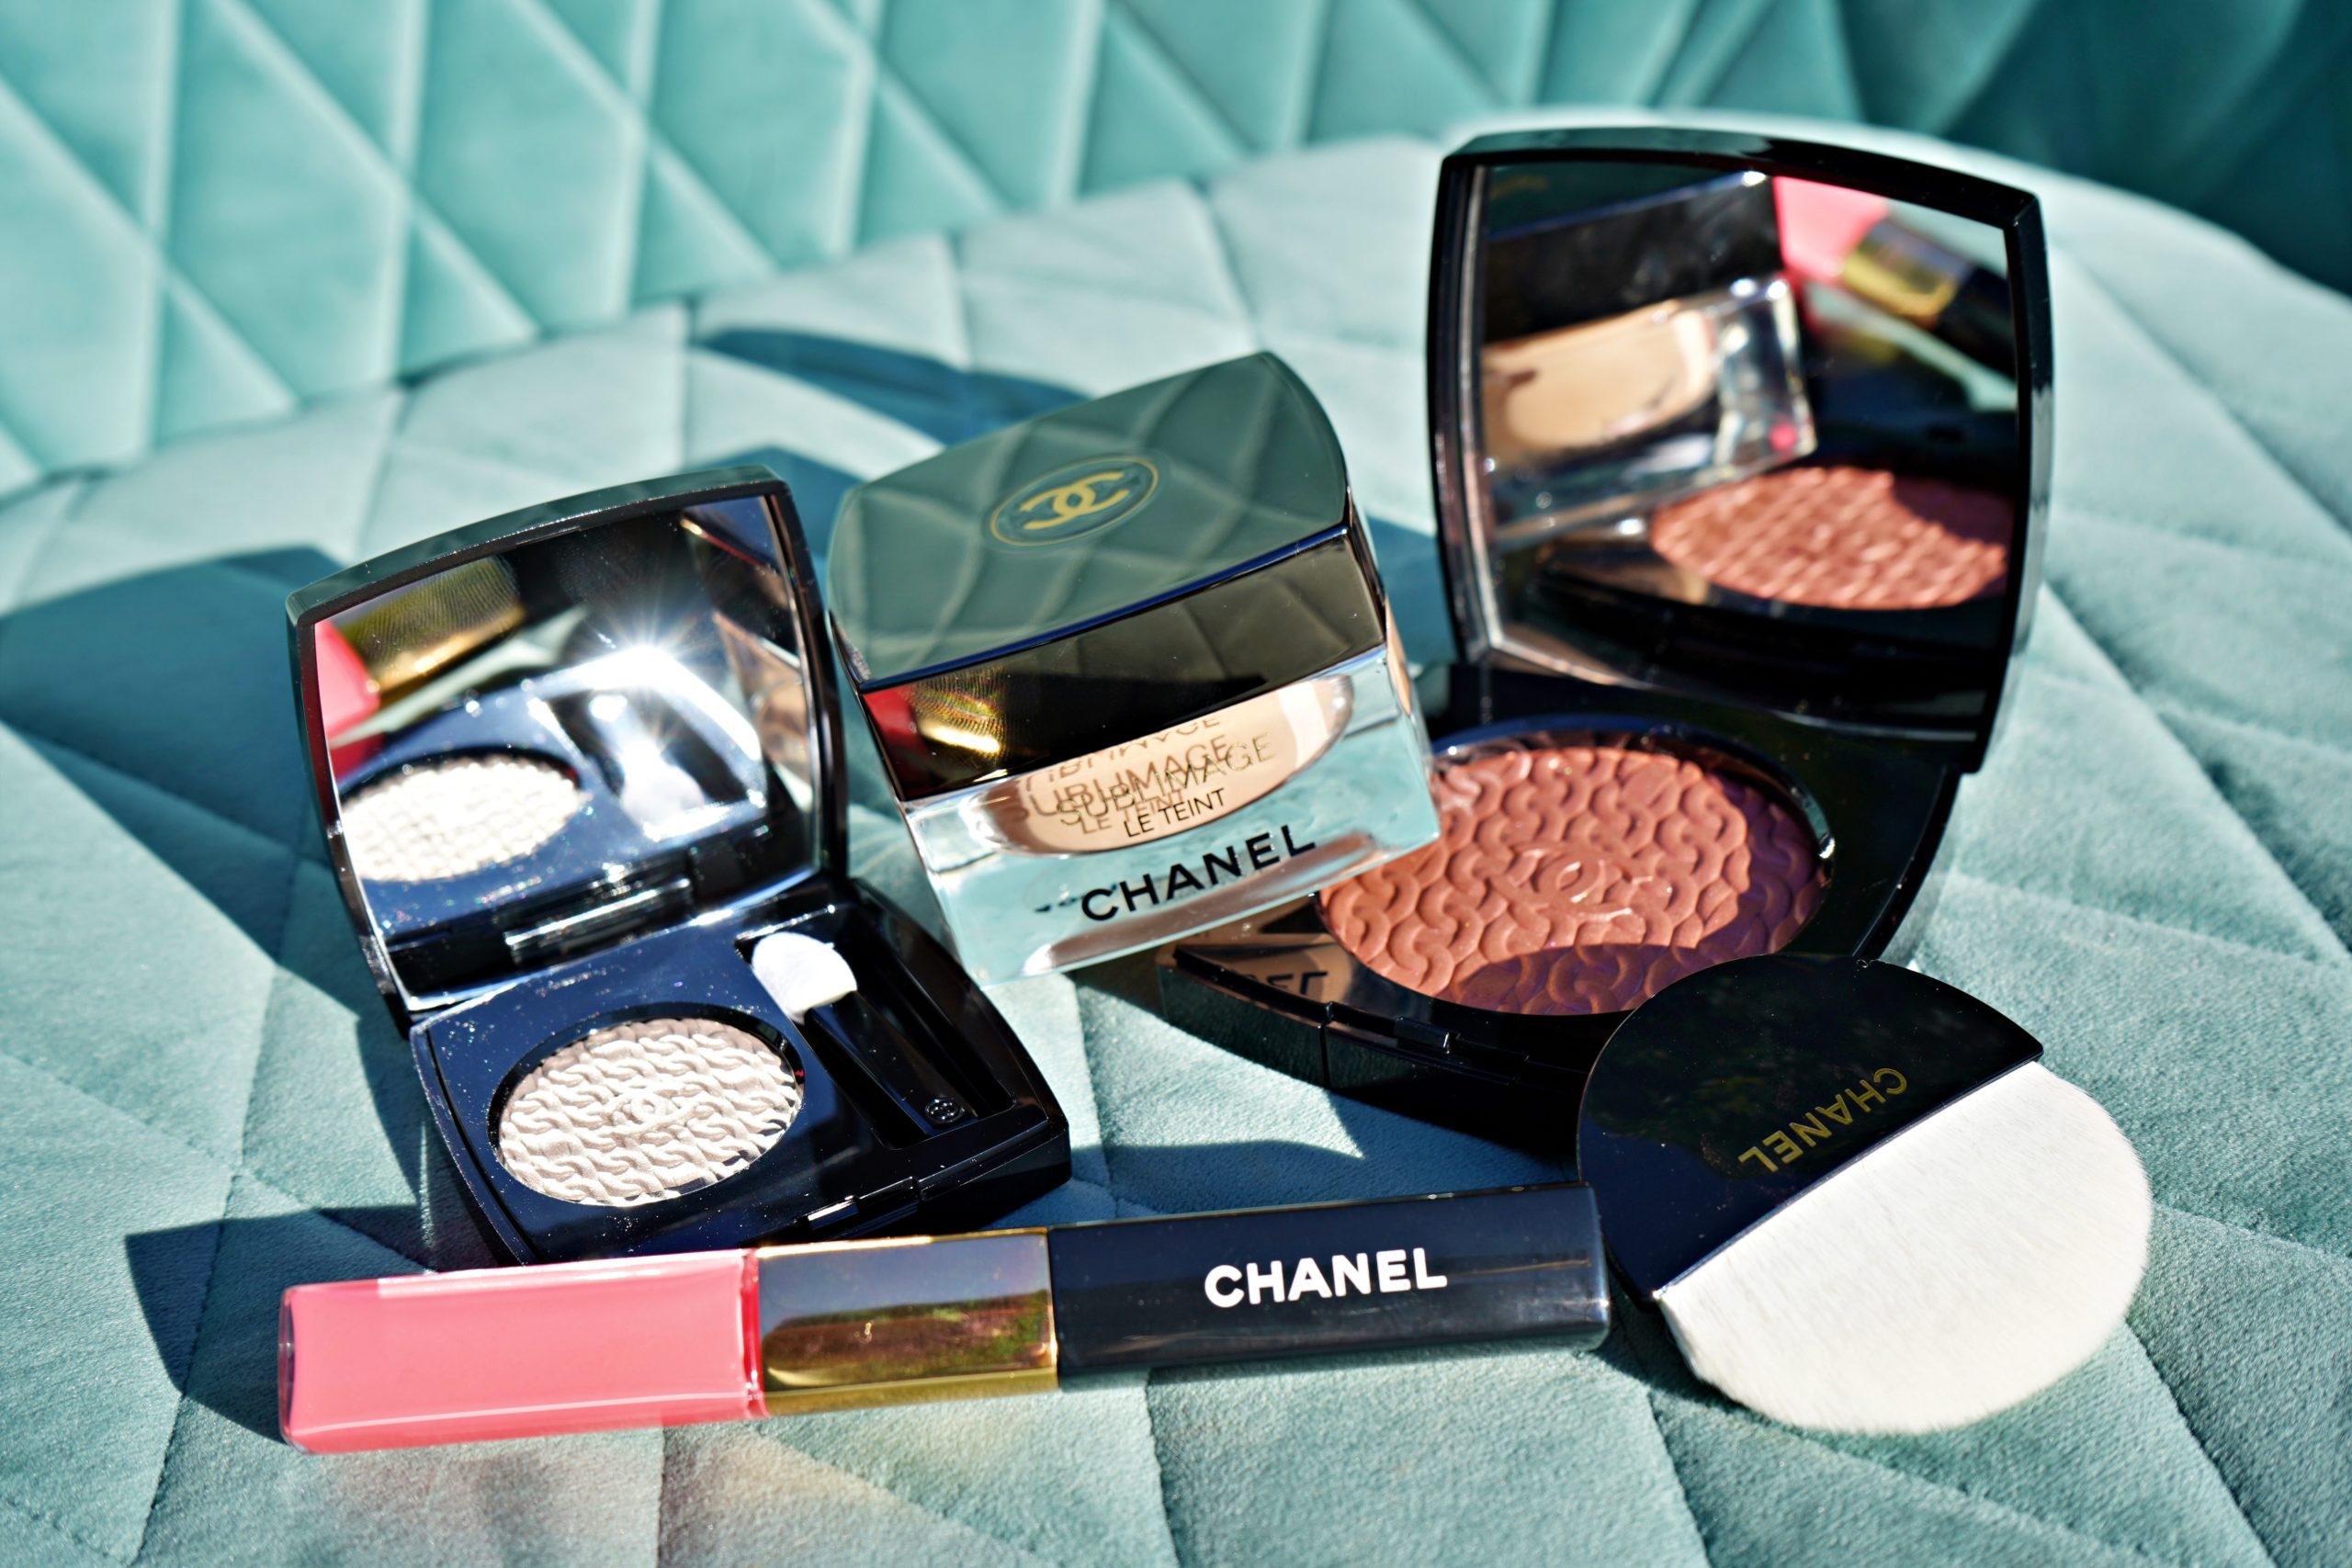 A Classic Chanel Beauty Look